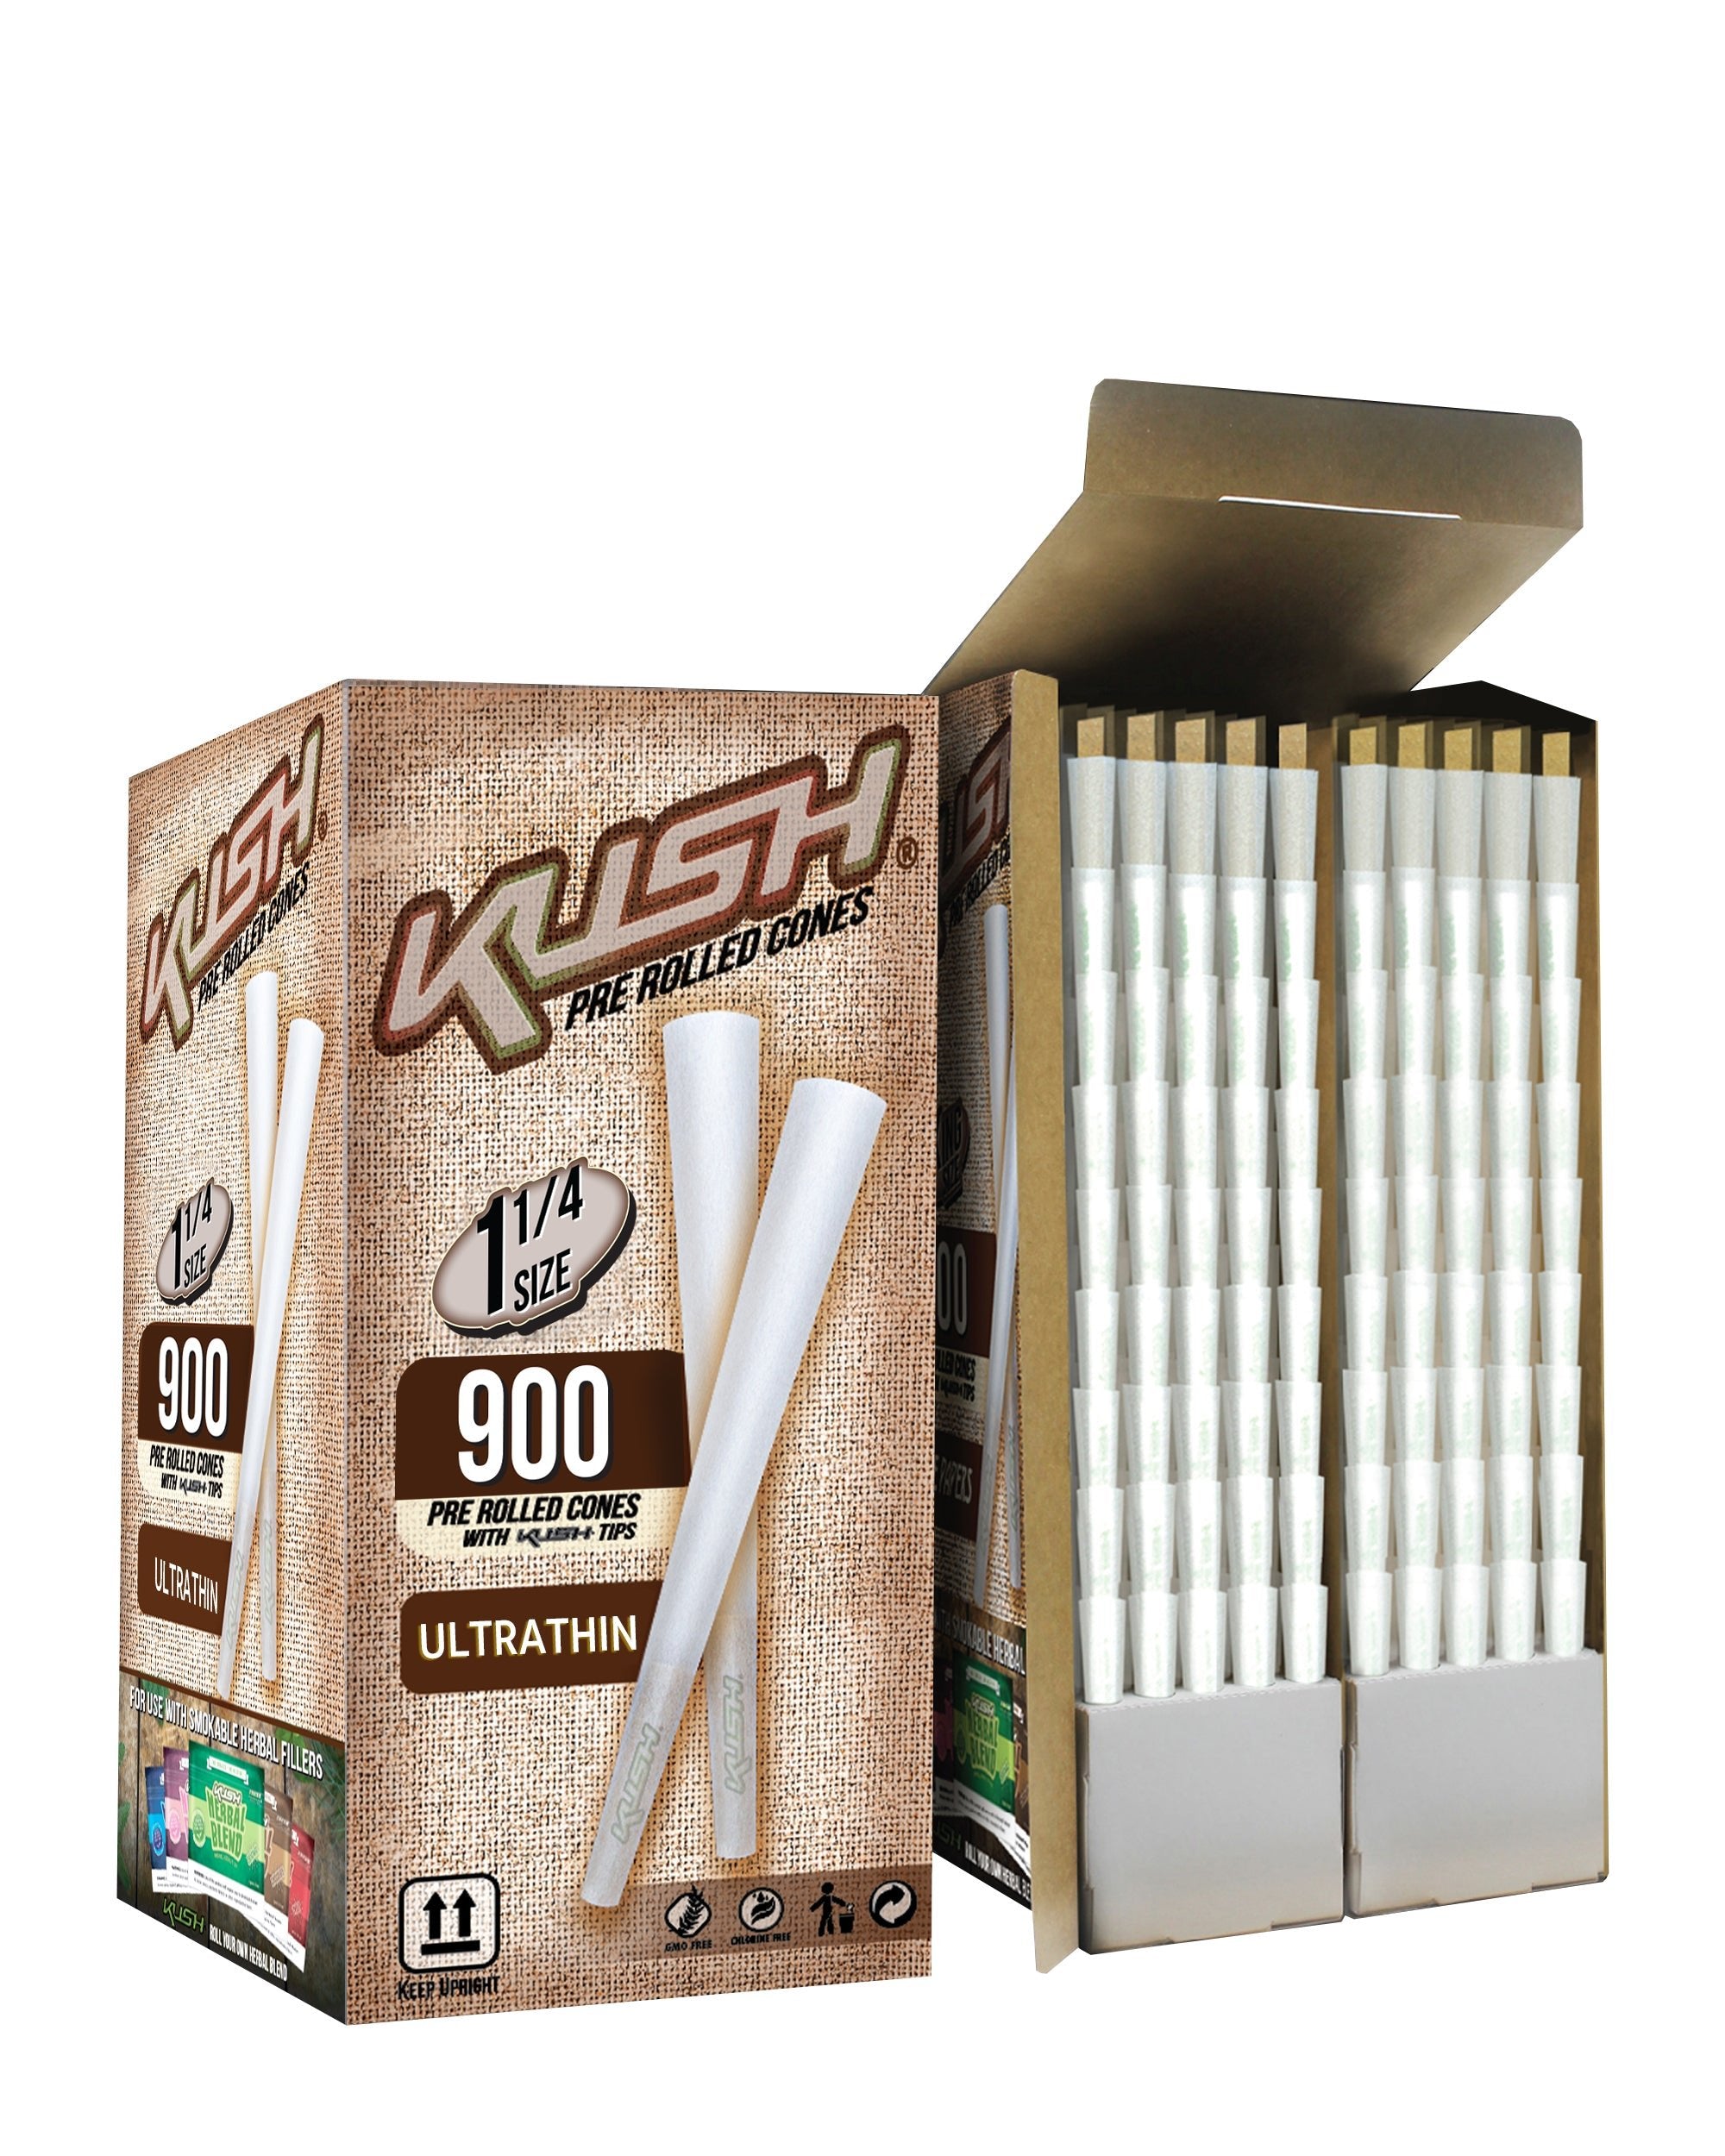 KUSH | Ultra Thin 1 1/4 Pre-Rolled Cones w/ Filter Tip | 84mm - Classic White Paper - 900 Count - 2